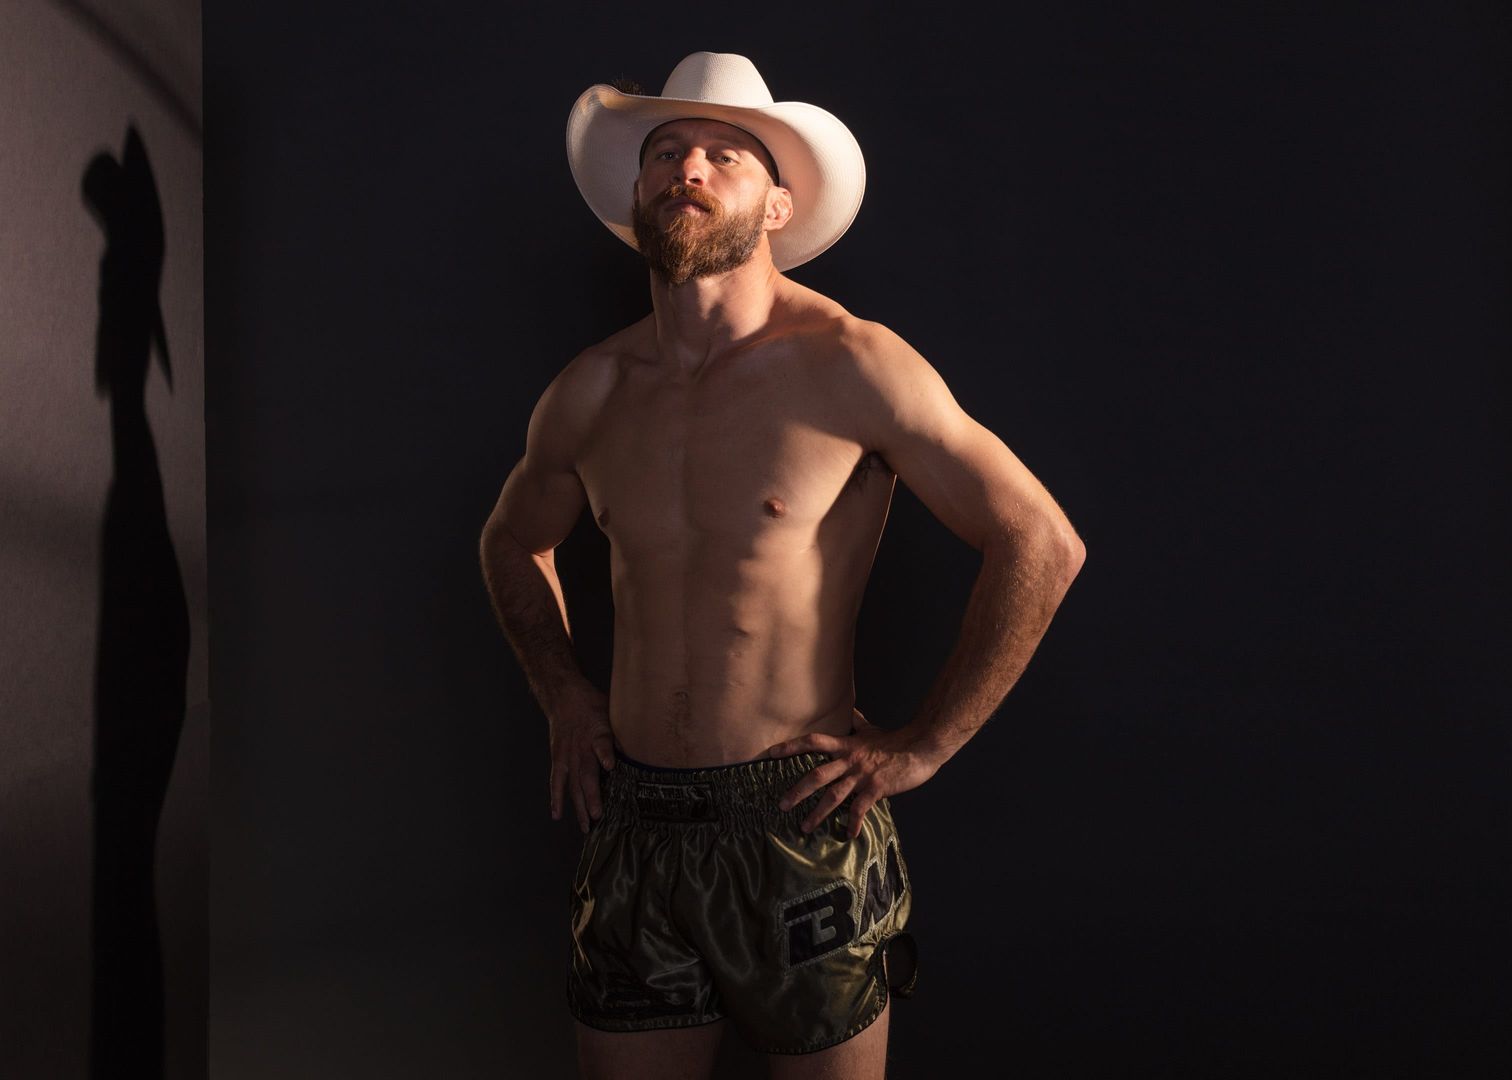 <p><strong>3. </strong><em>ESPN: UFC 246: The Painful Stories Behind Cowboy Cerrone's Injuries </em></p>